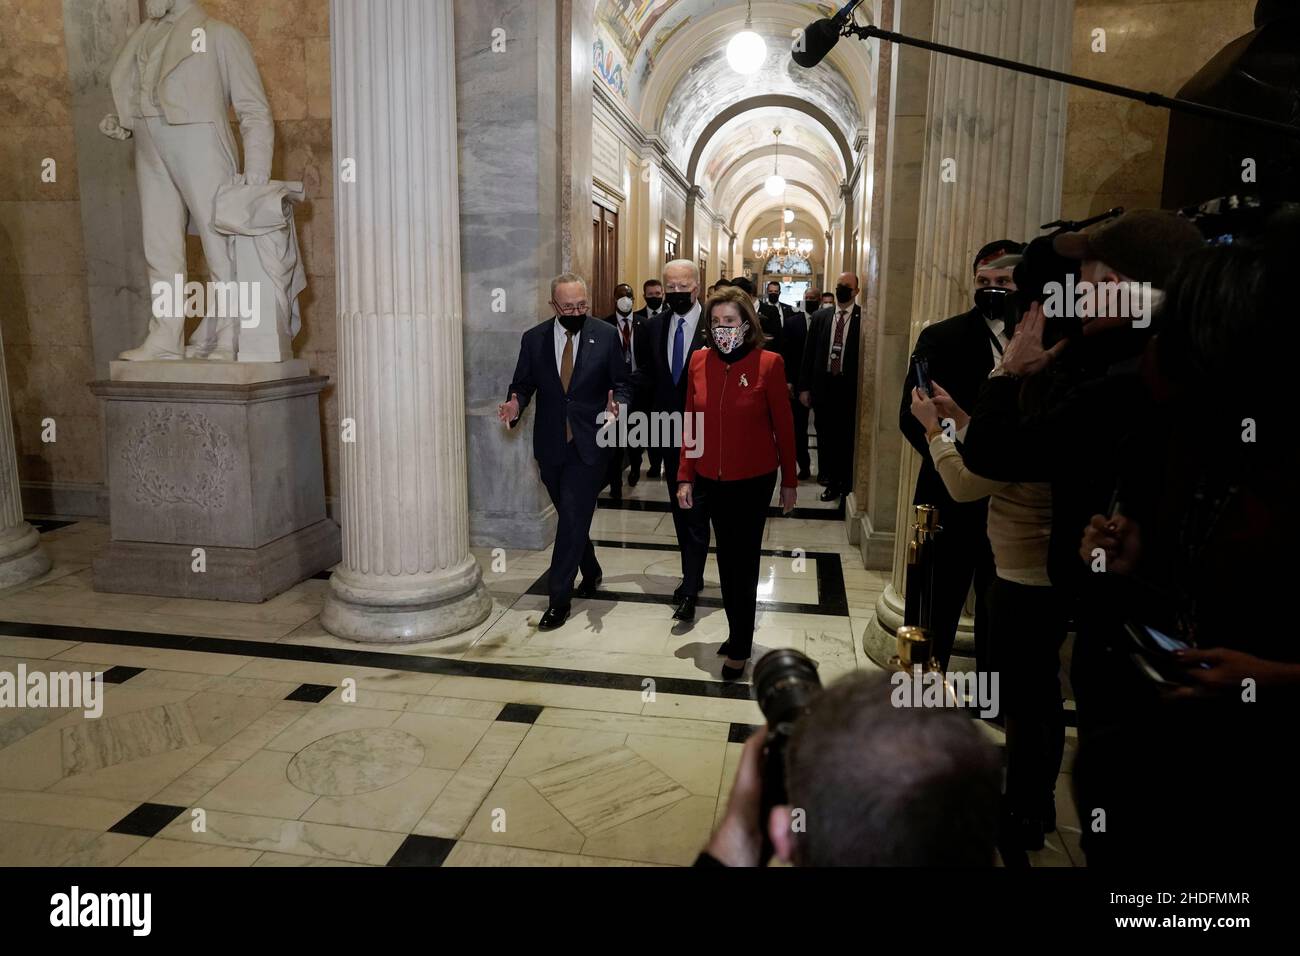 U.S. President Joe Biden joined by Senate Majority Leader Chuck Schumer (D-NY) and U.S. House Speaker Nancy Pelosi (D-CA) walk through the Hall of Columns before speaking during a ceremony on the first anniversary of the January 6, 2021 attack on the U.S. Capitol by supporters of former President Donald Trump in Washington, D.C., U.S., January 6, 2022. Ken Cedeno/Pool via REUTERS Stock Photo